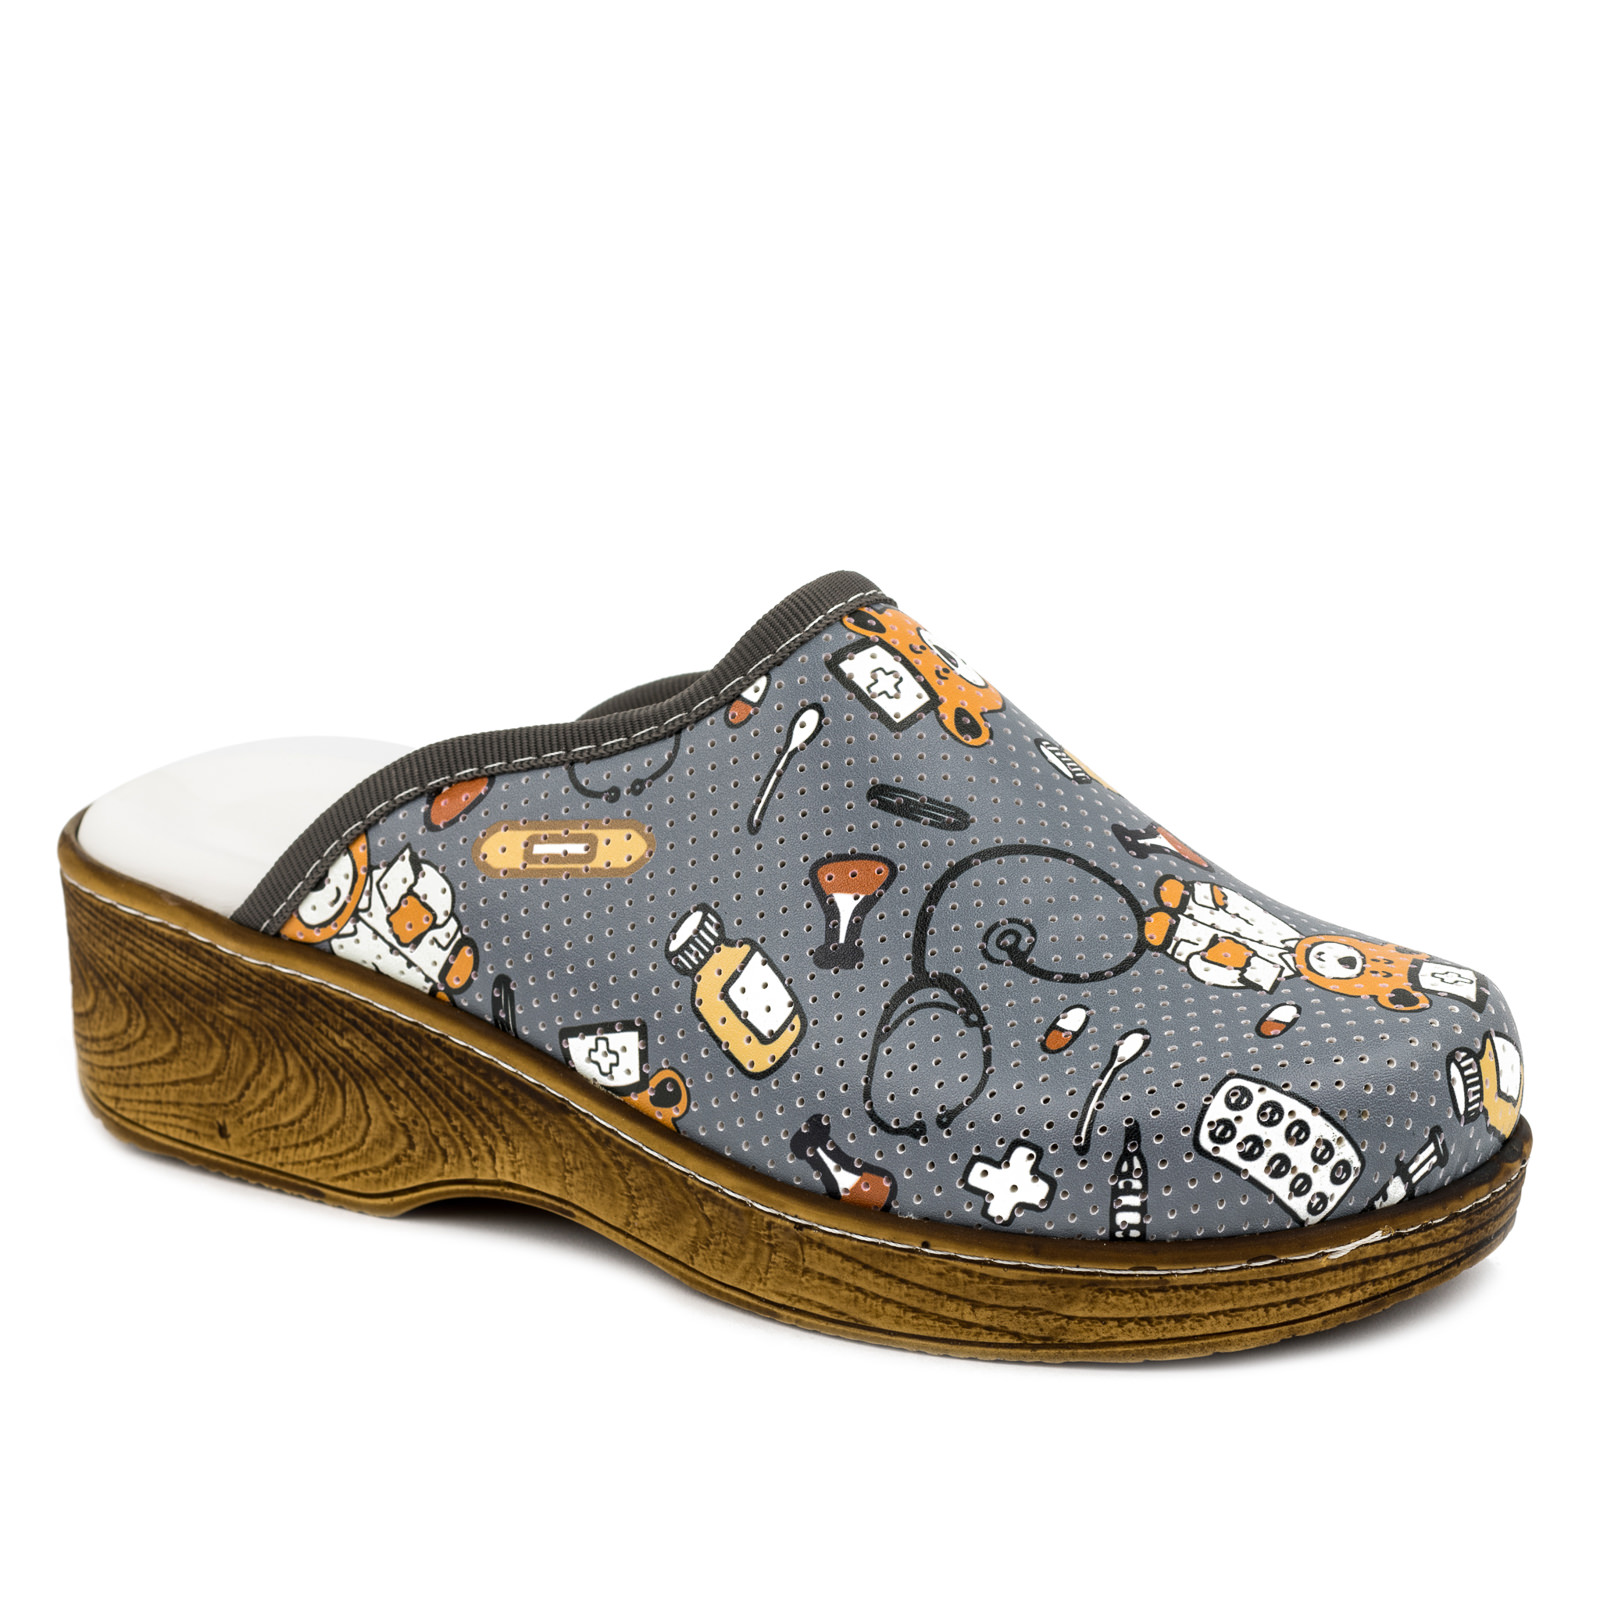 Patterned women clogs A044 - DOCTOR - GREY